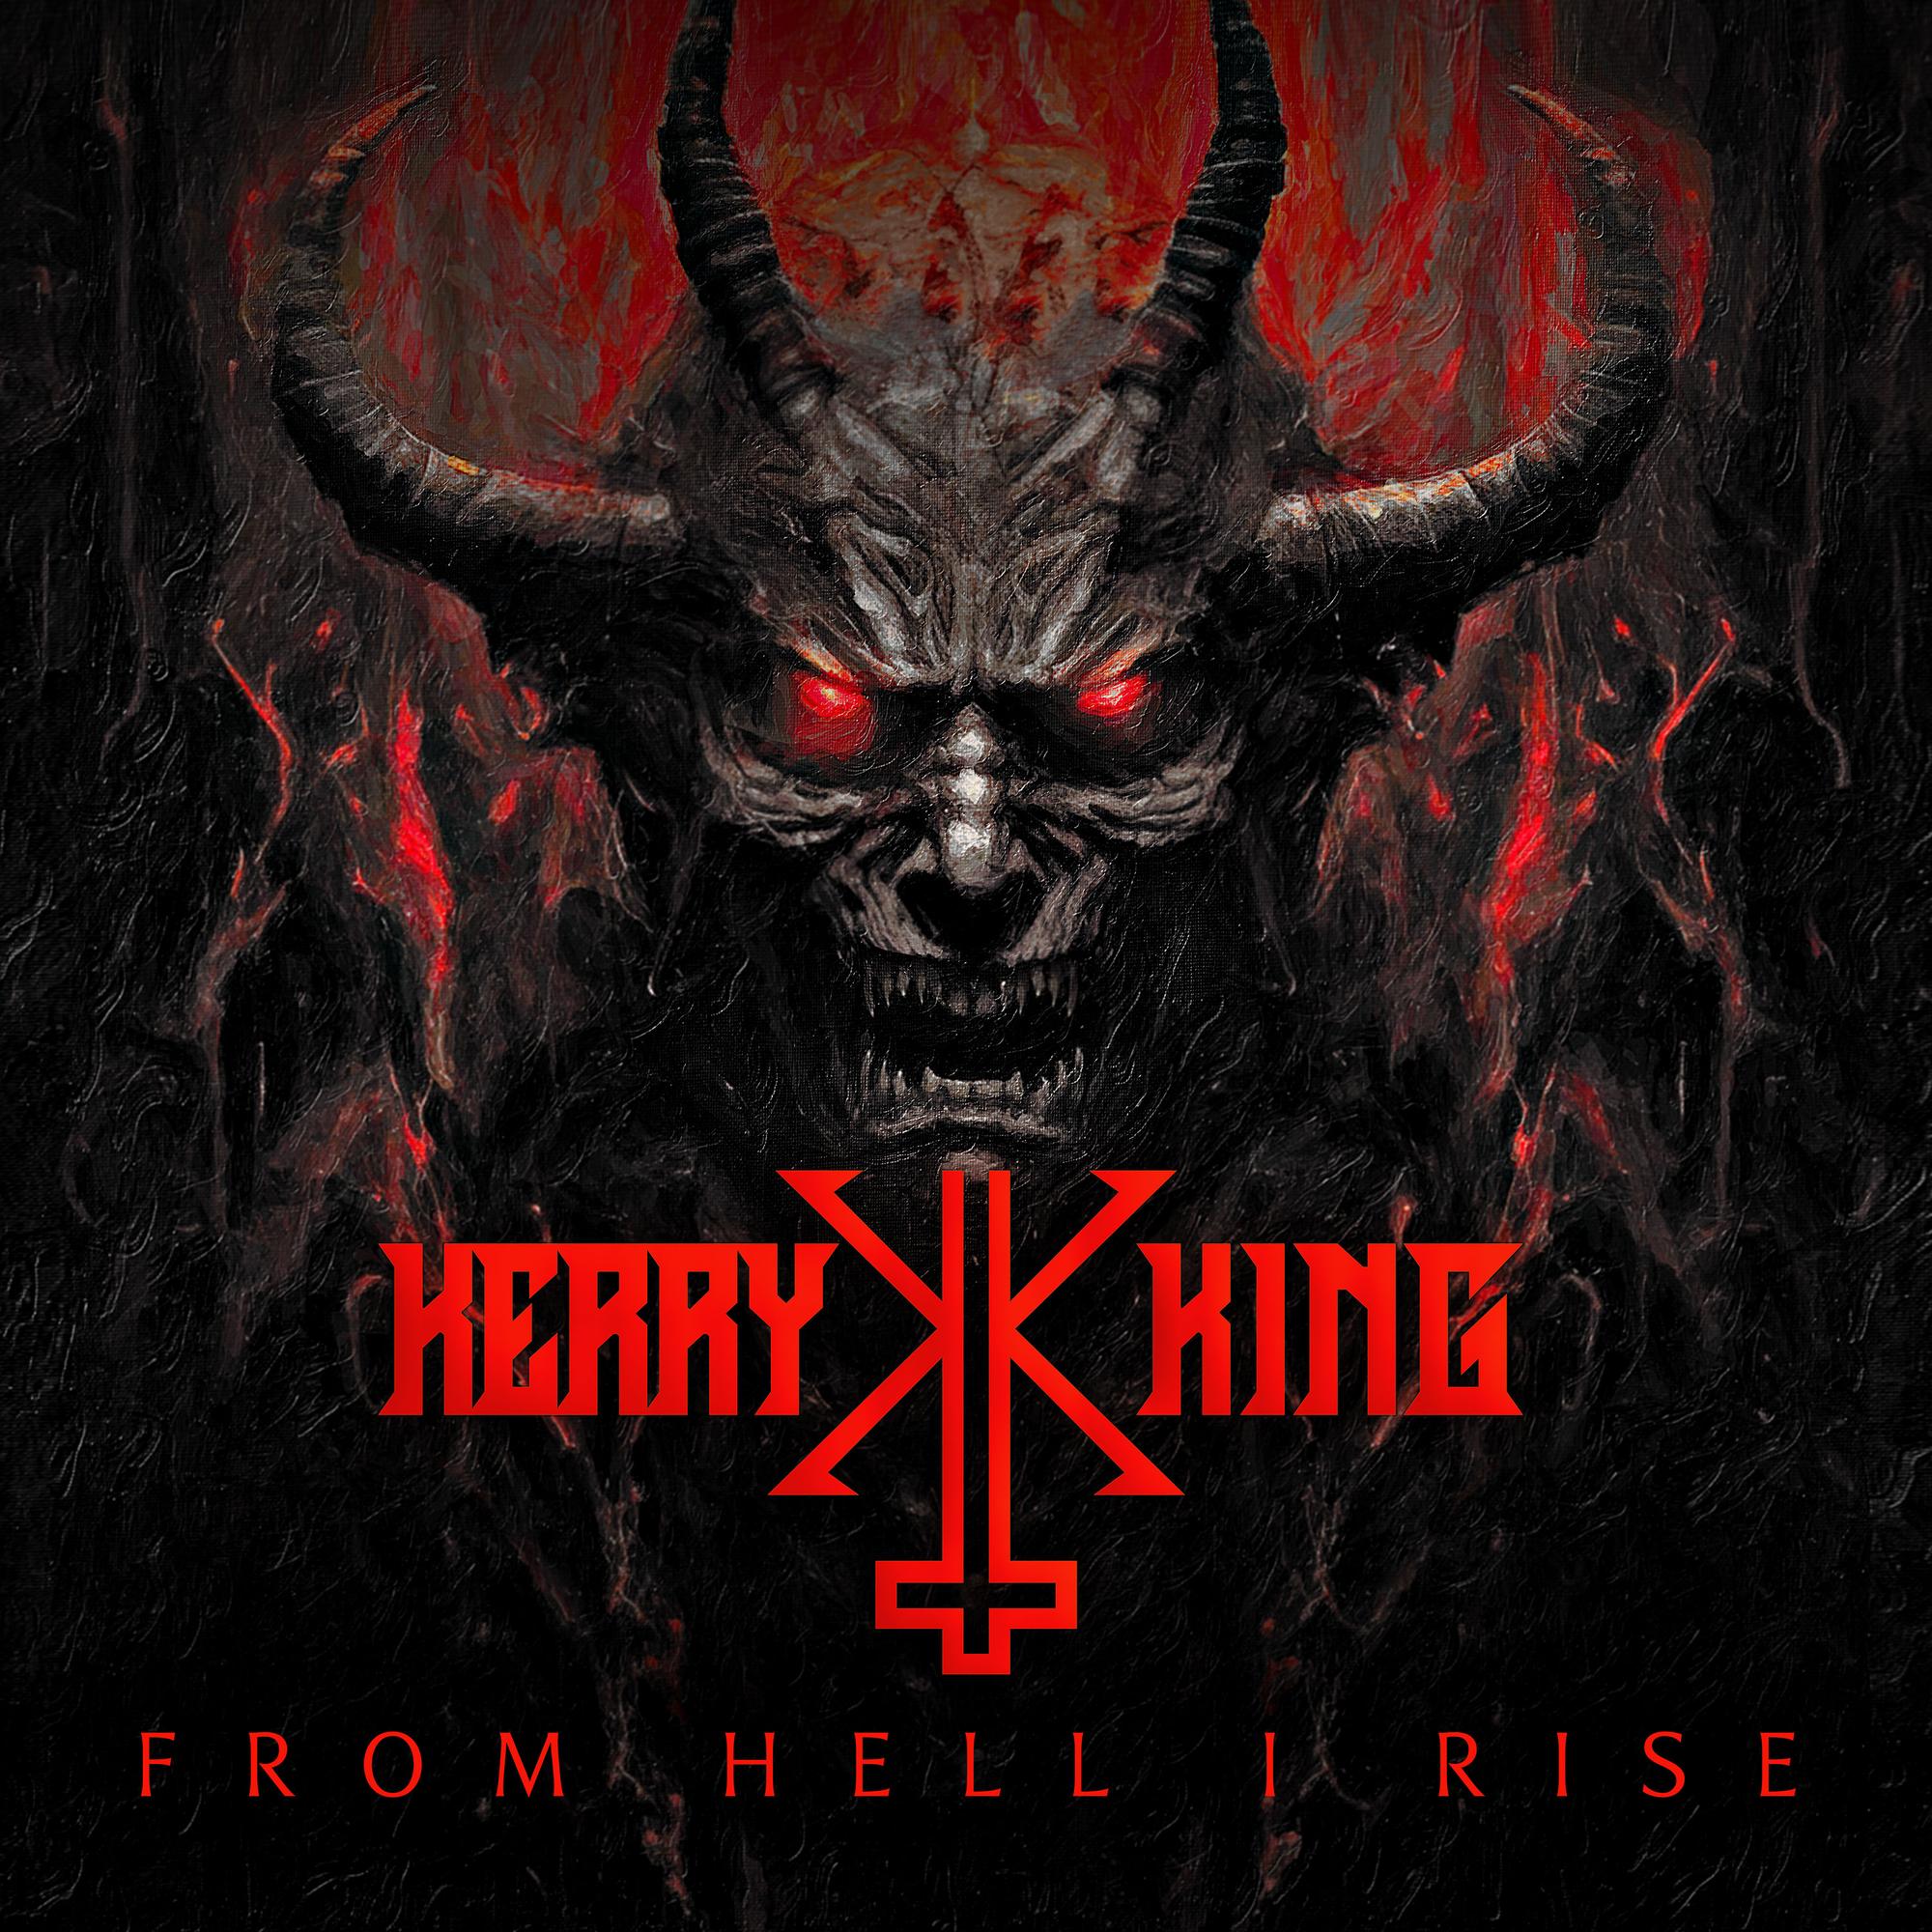 Kerry King "From Hell I Rise" Red / Black Marble Vinyl